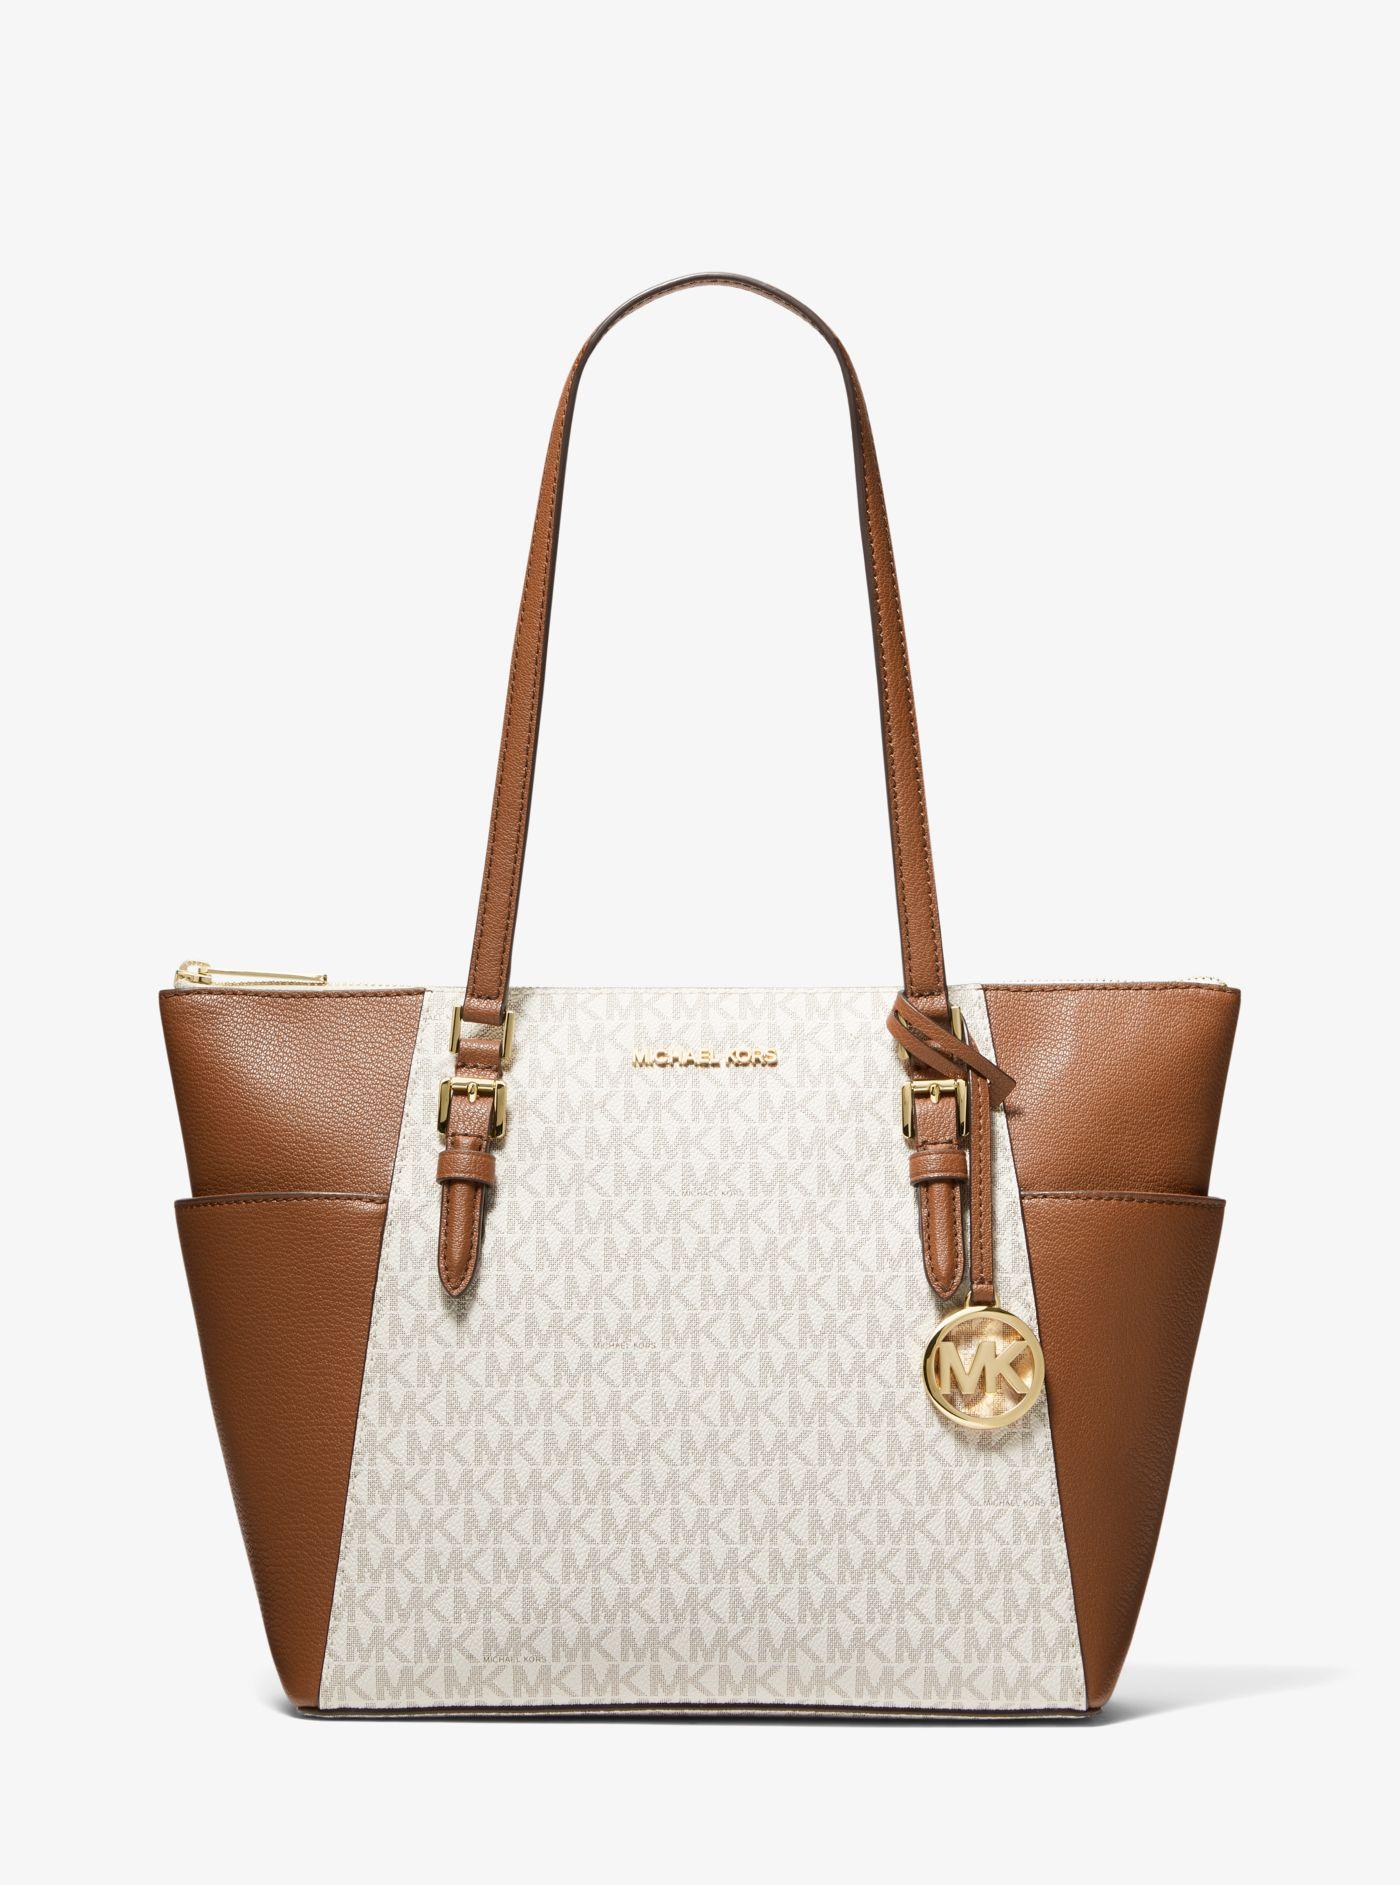 Womens Bags Tote bags Save 53% Michael Kors Charlotte Signature Leather Tote Bag in Brown 